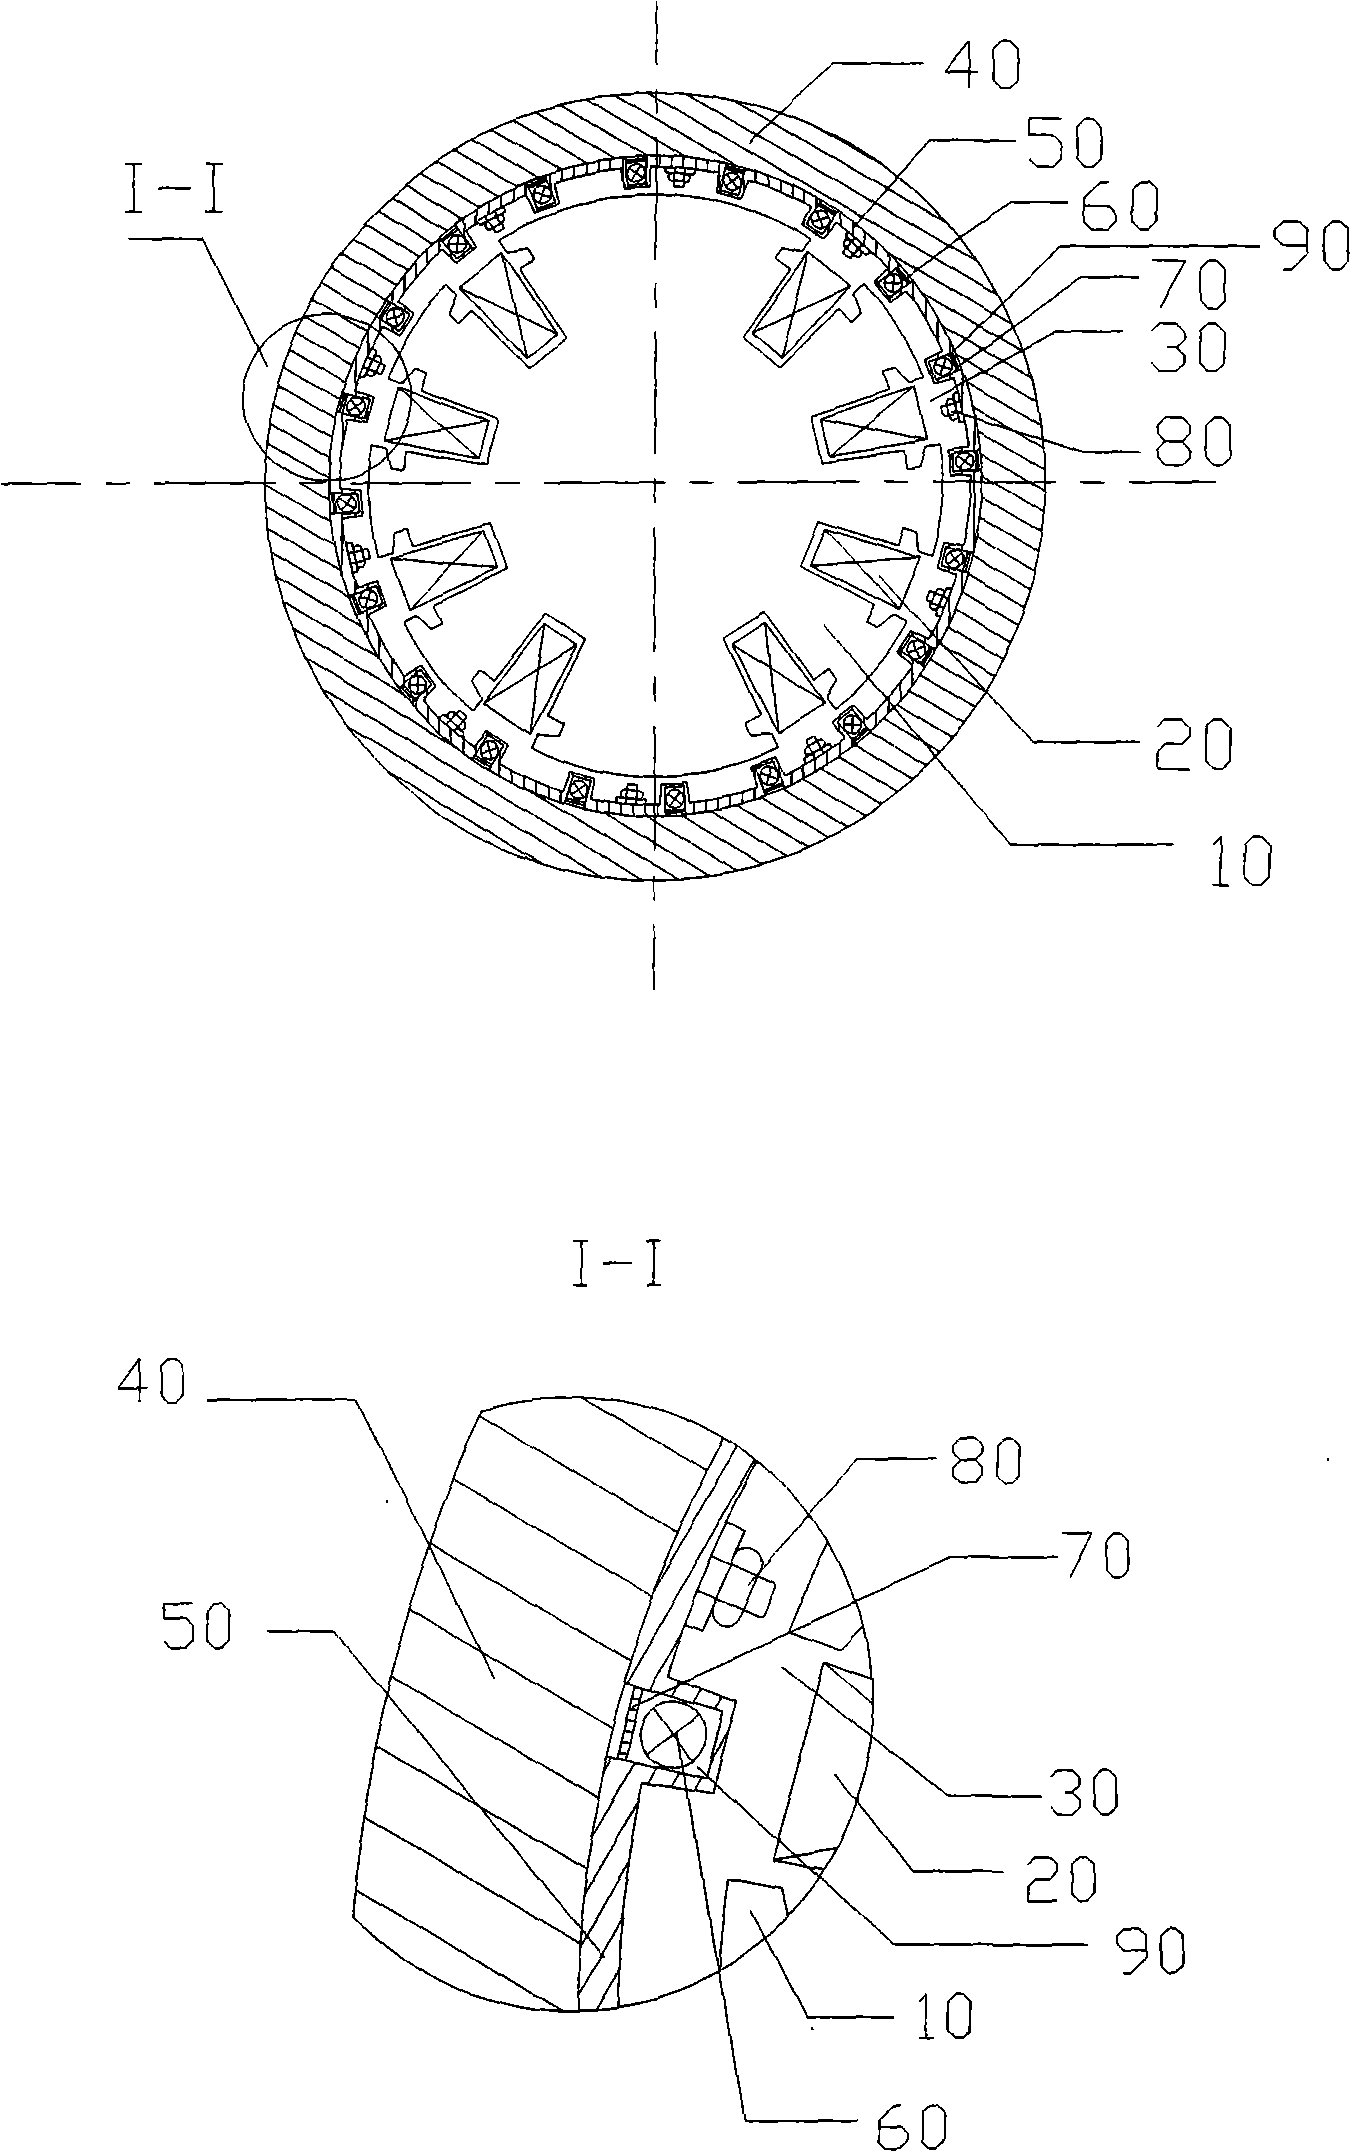 Non-groove stator of evaporative cooling motor